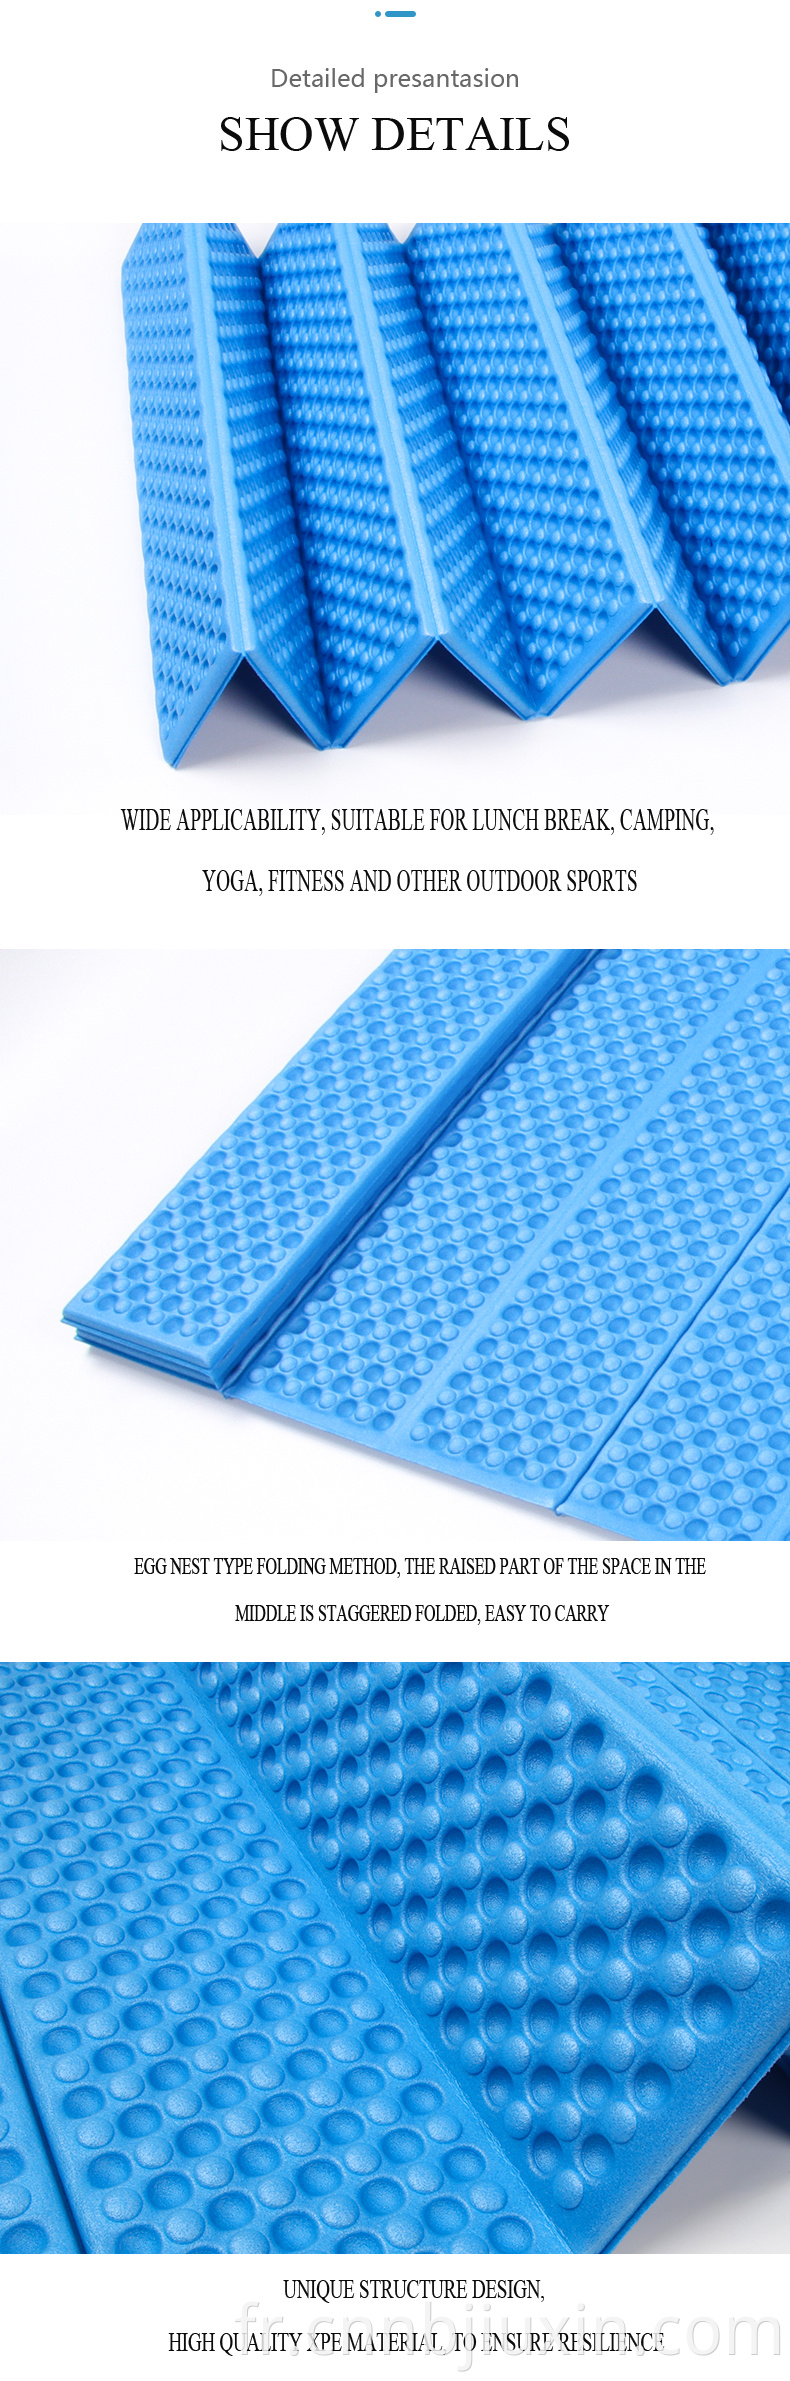 Ultralight Sleeping Camping Imperproofing Egg Nest Trough Camping Pad